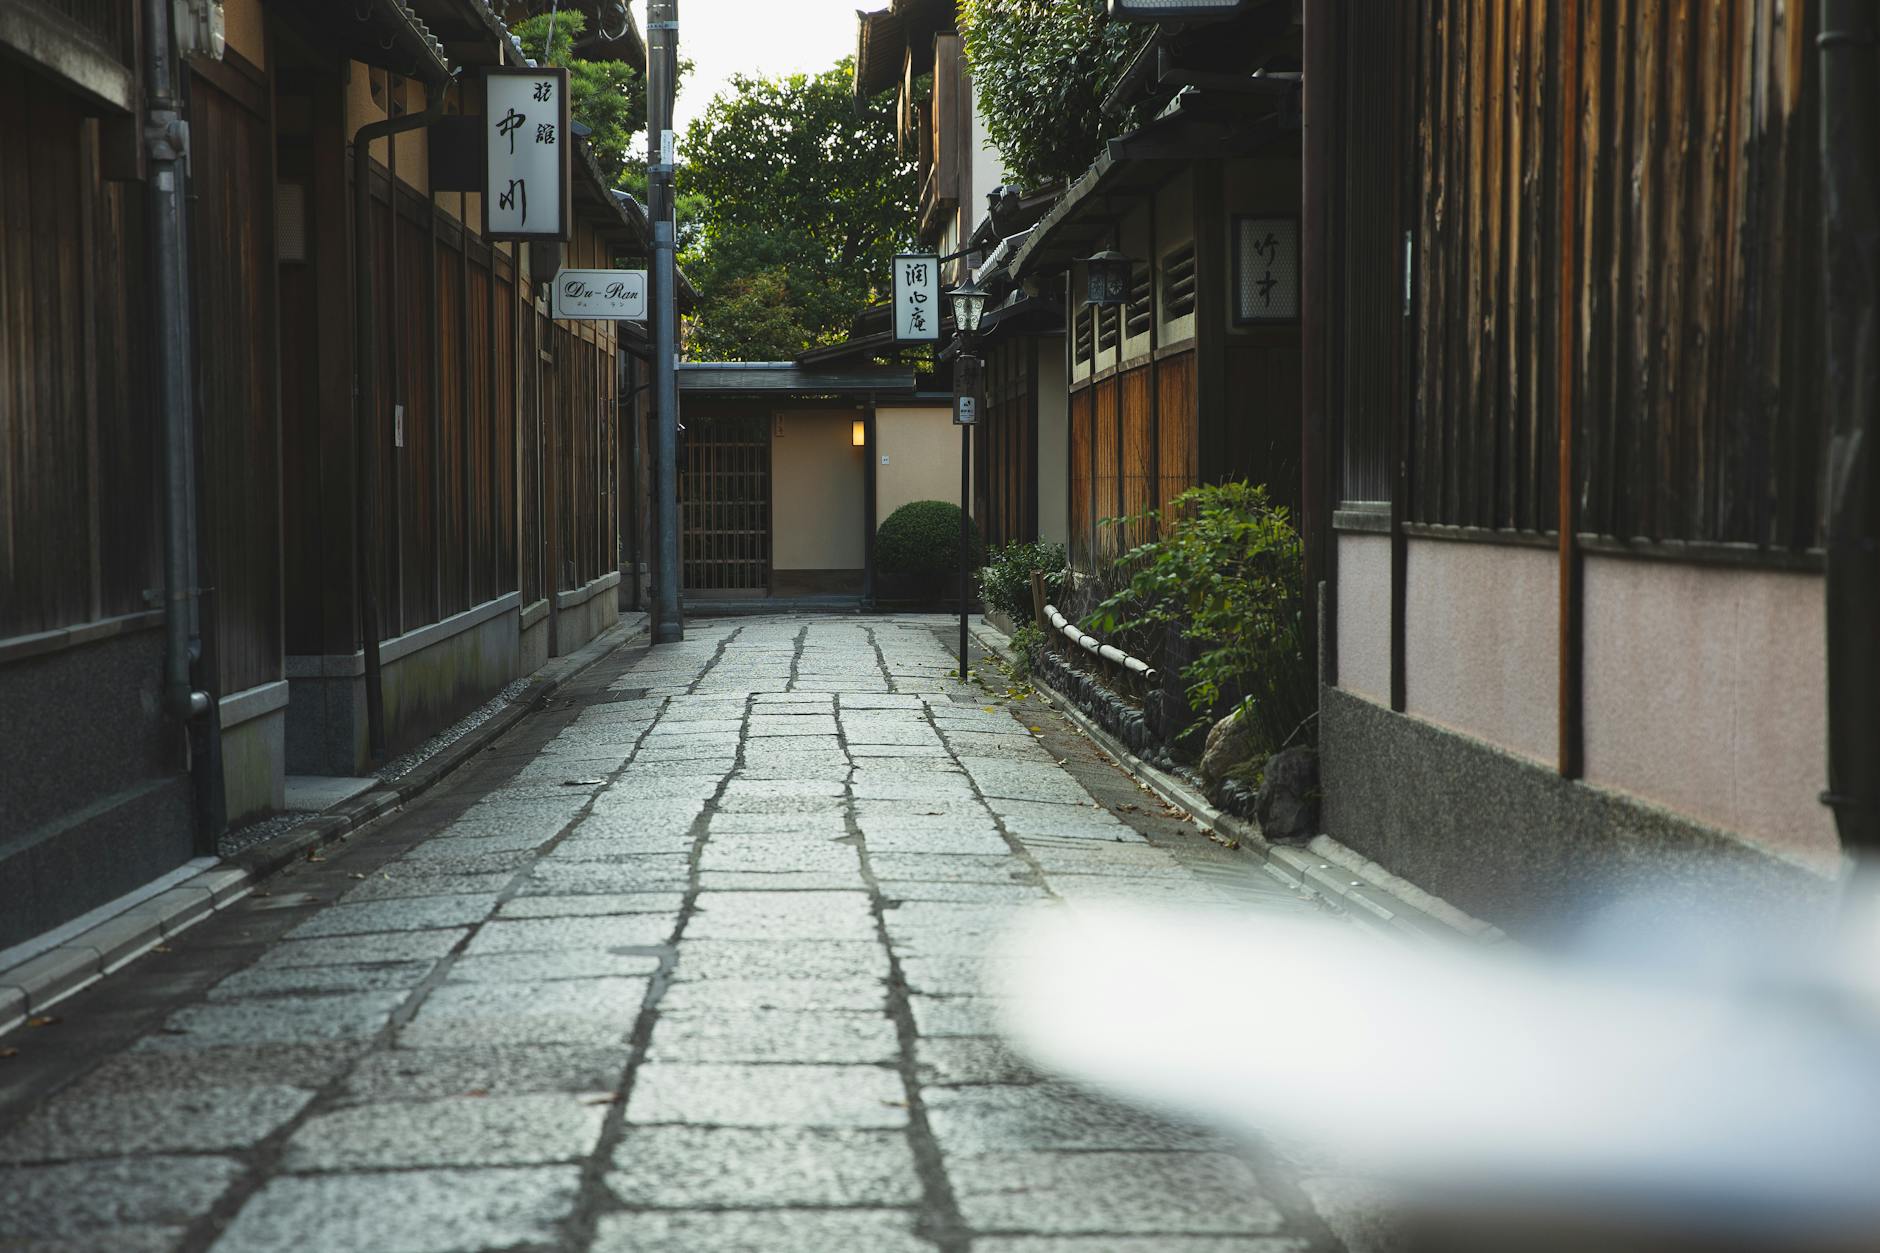 Empty paved street in historic town in Japan